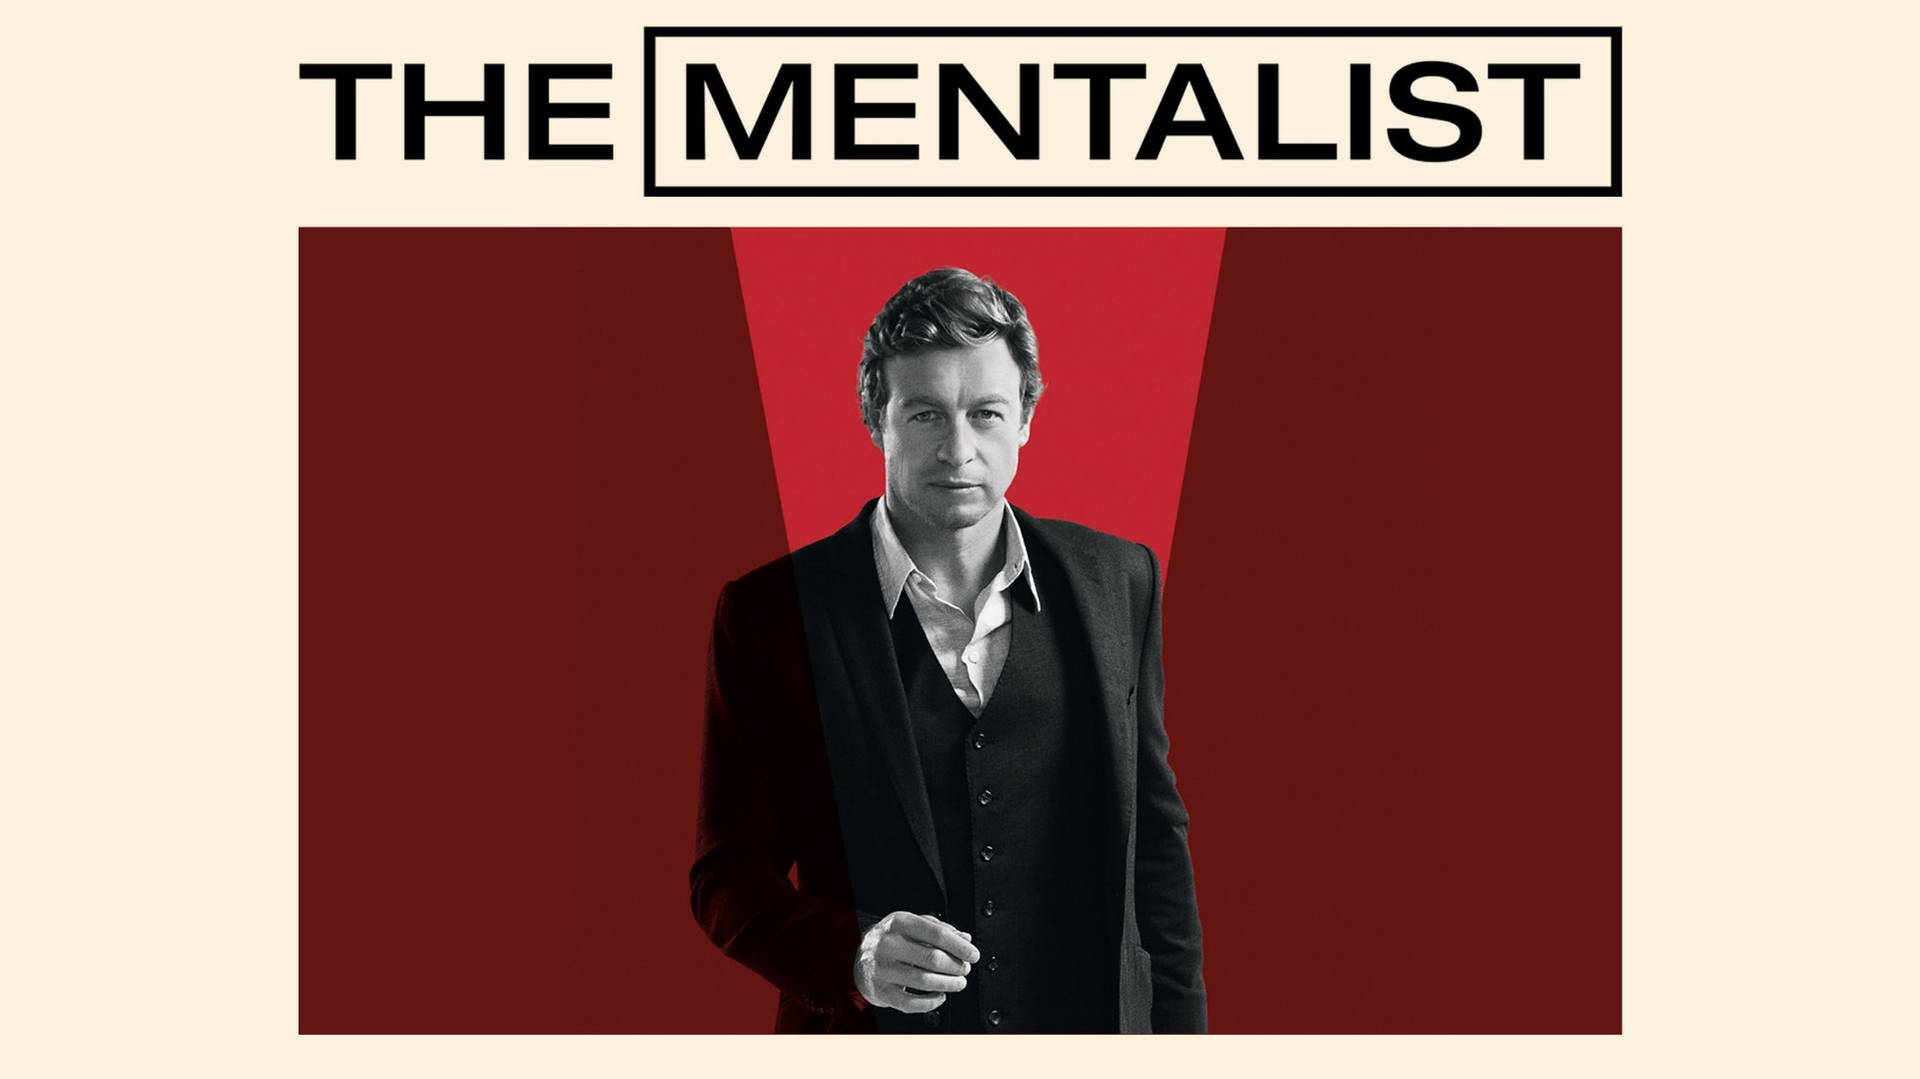 The Mentalist Television Series Poster With Simon Baker Wallpaper